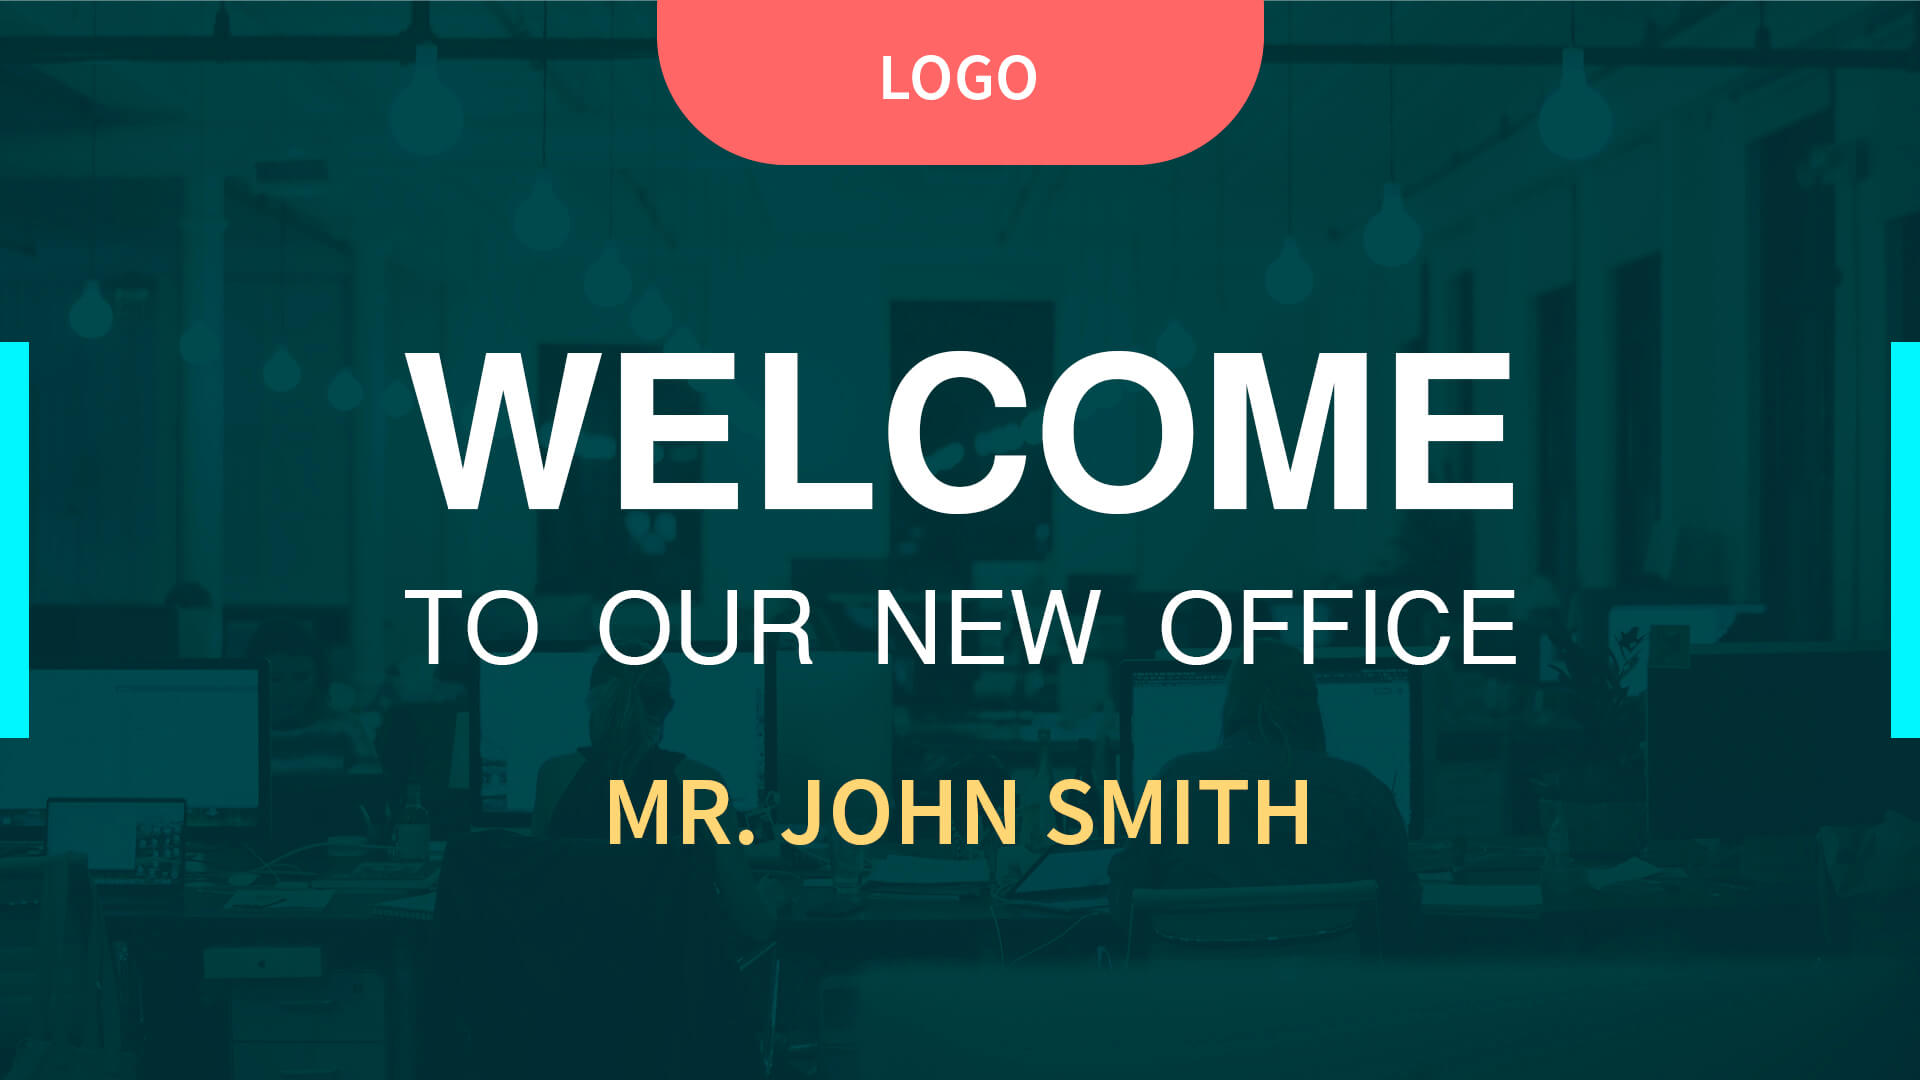 guest welcome screen for office